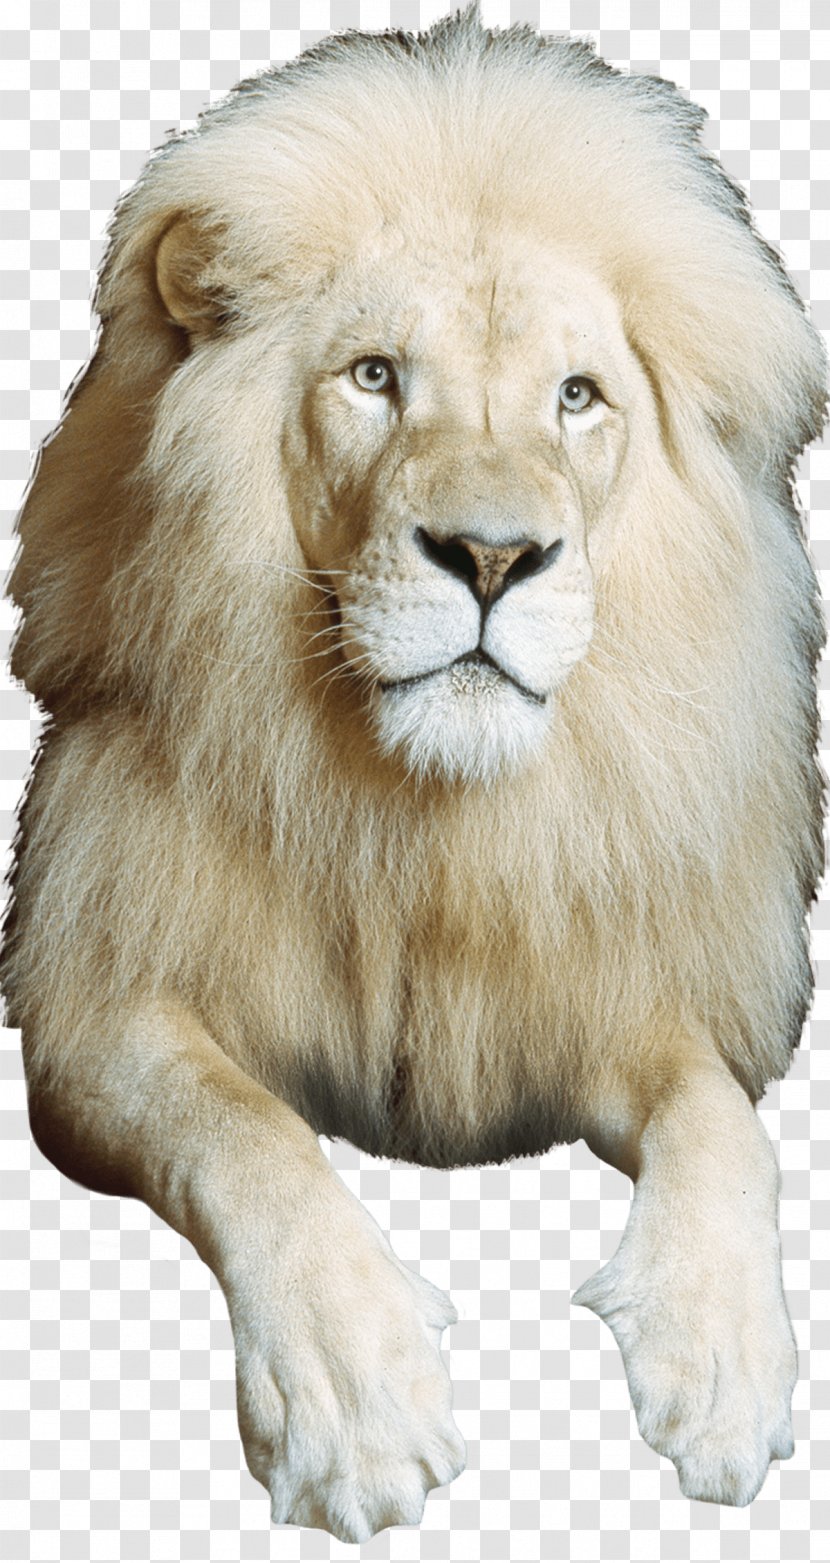 East African Lion Circus Whiskers Mane Photography - Elephant Transparent PNG